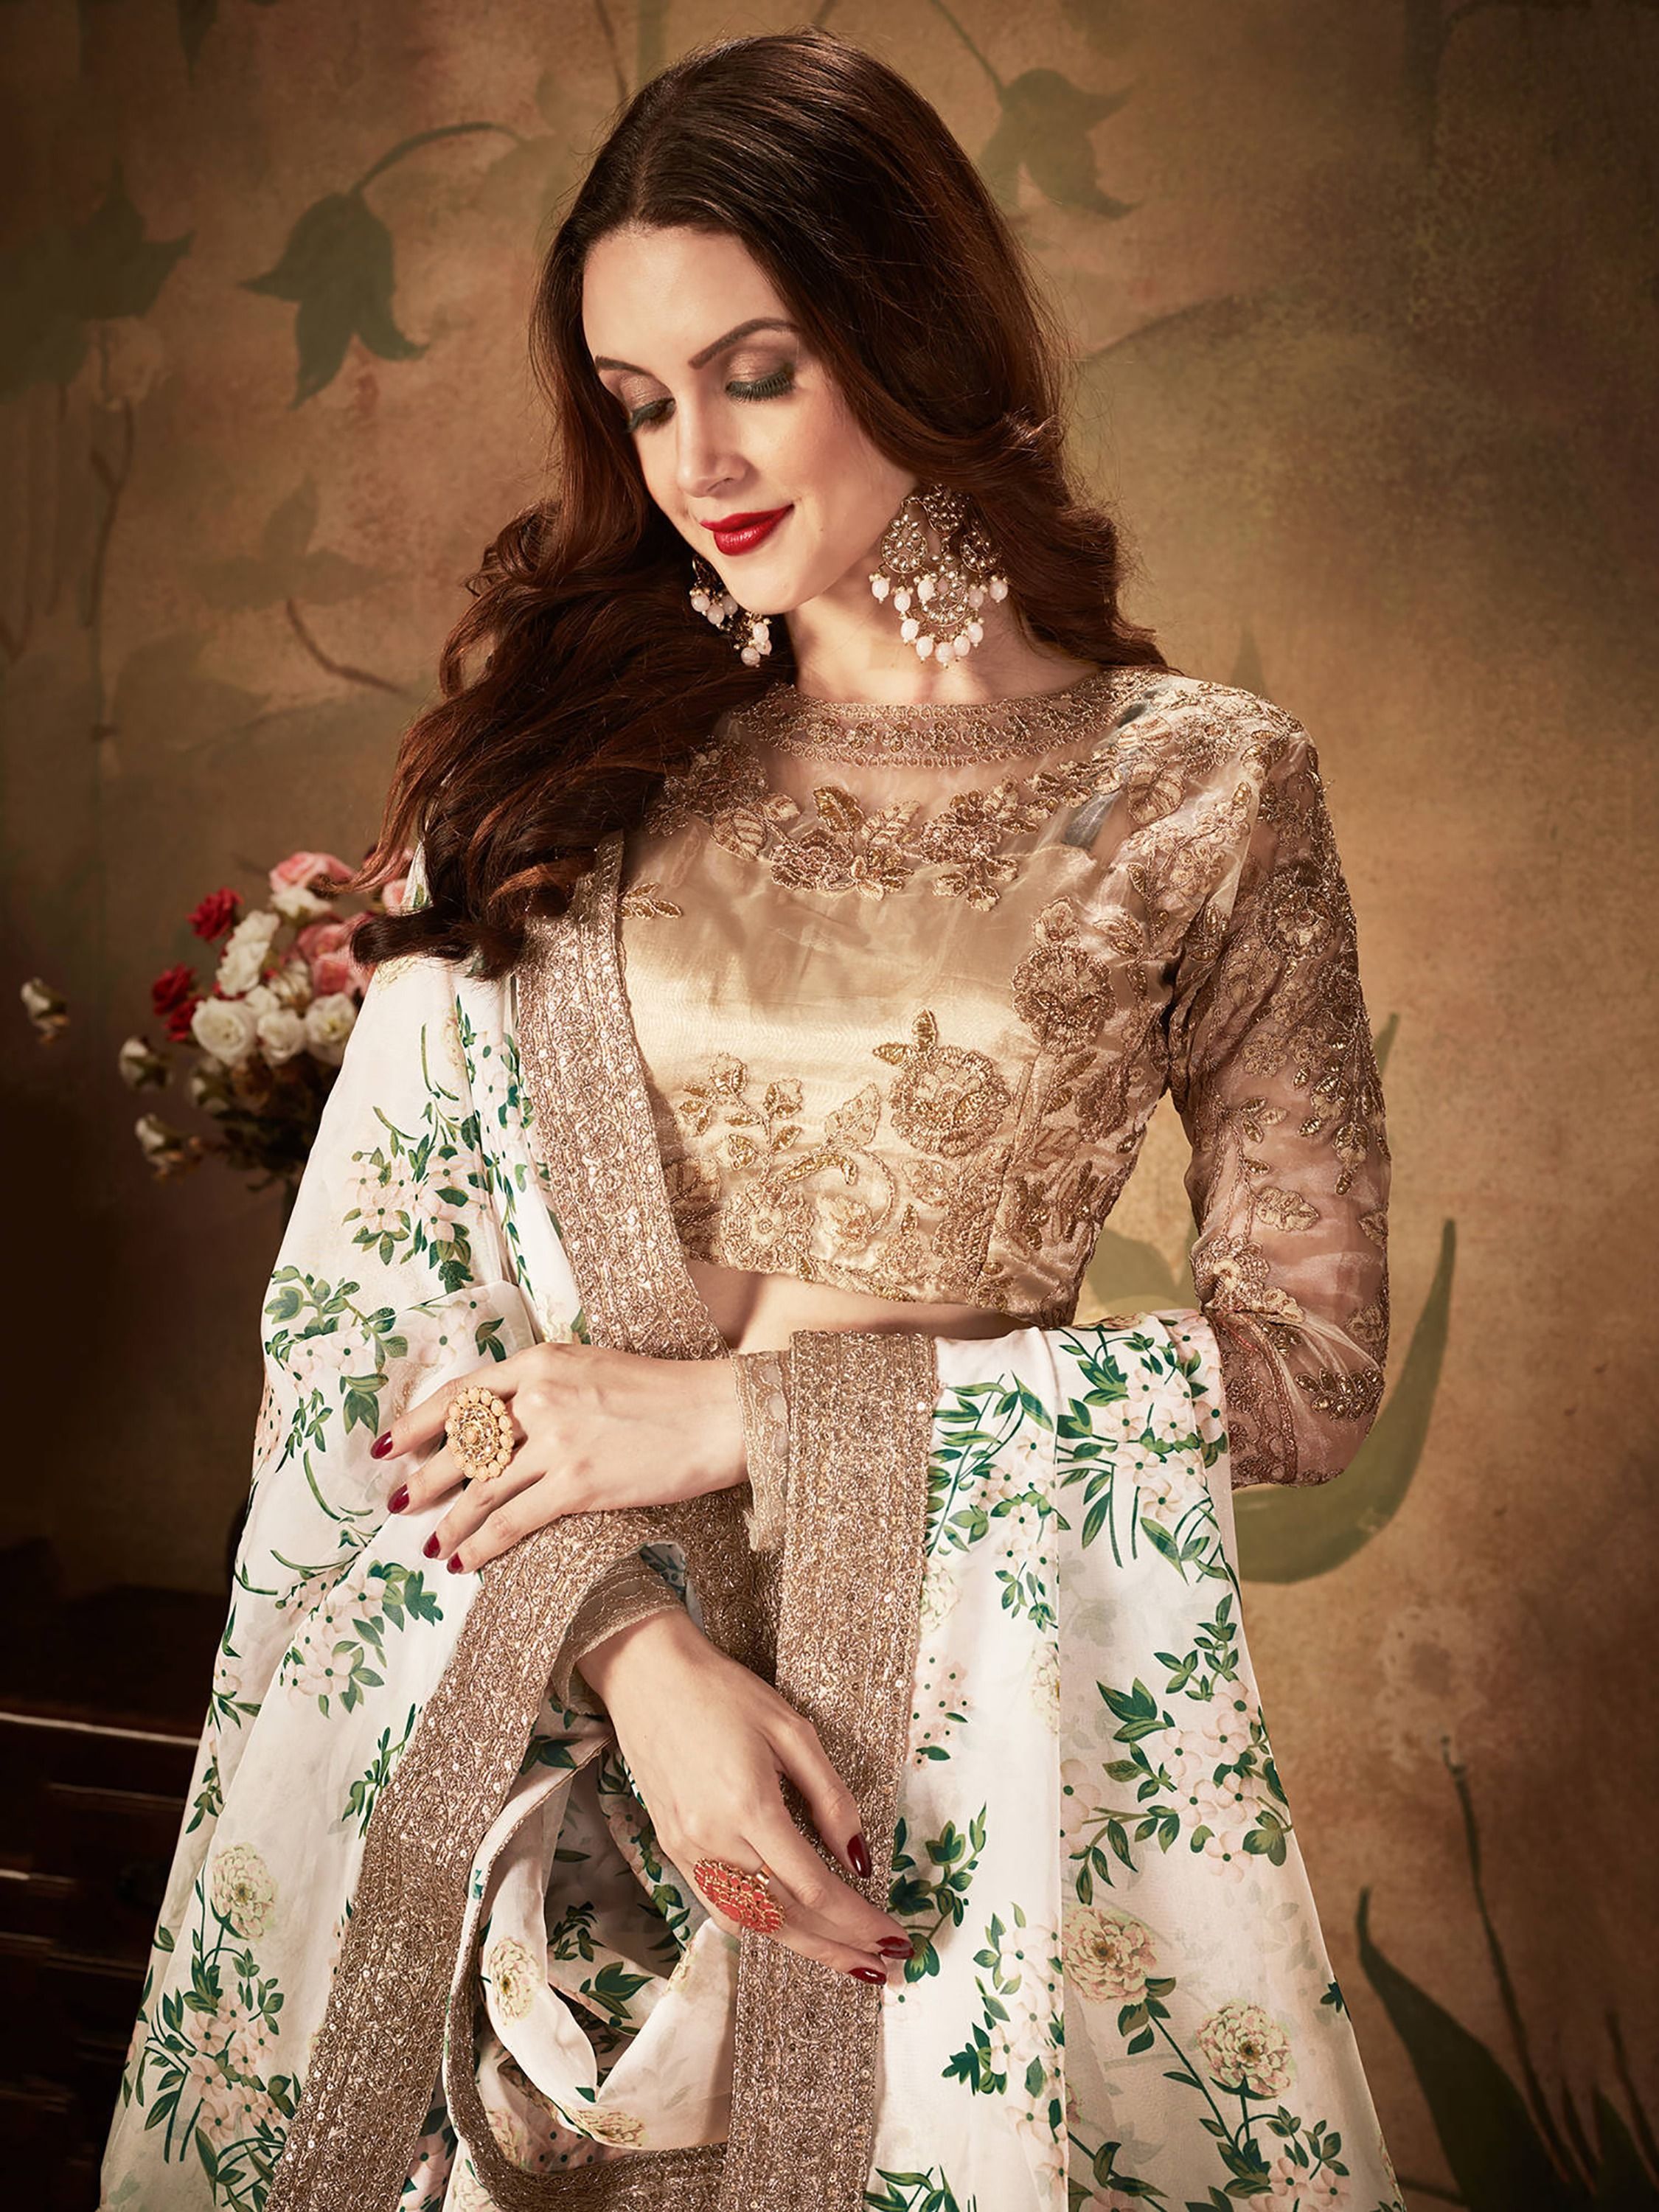 Latest Sabyasachi Collection For Bride & Grooms - Decoded!